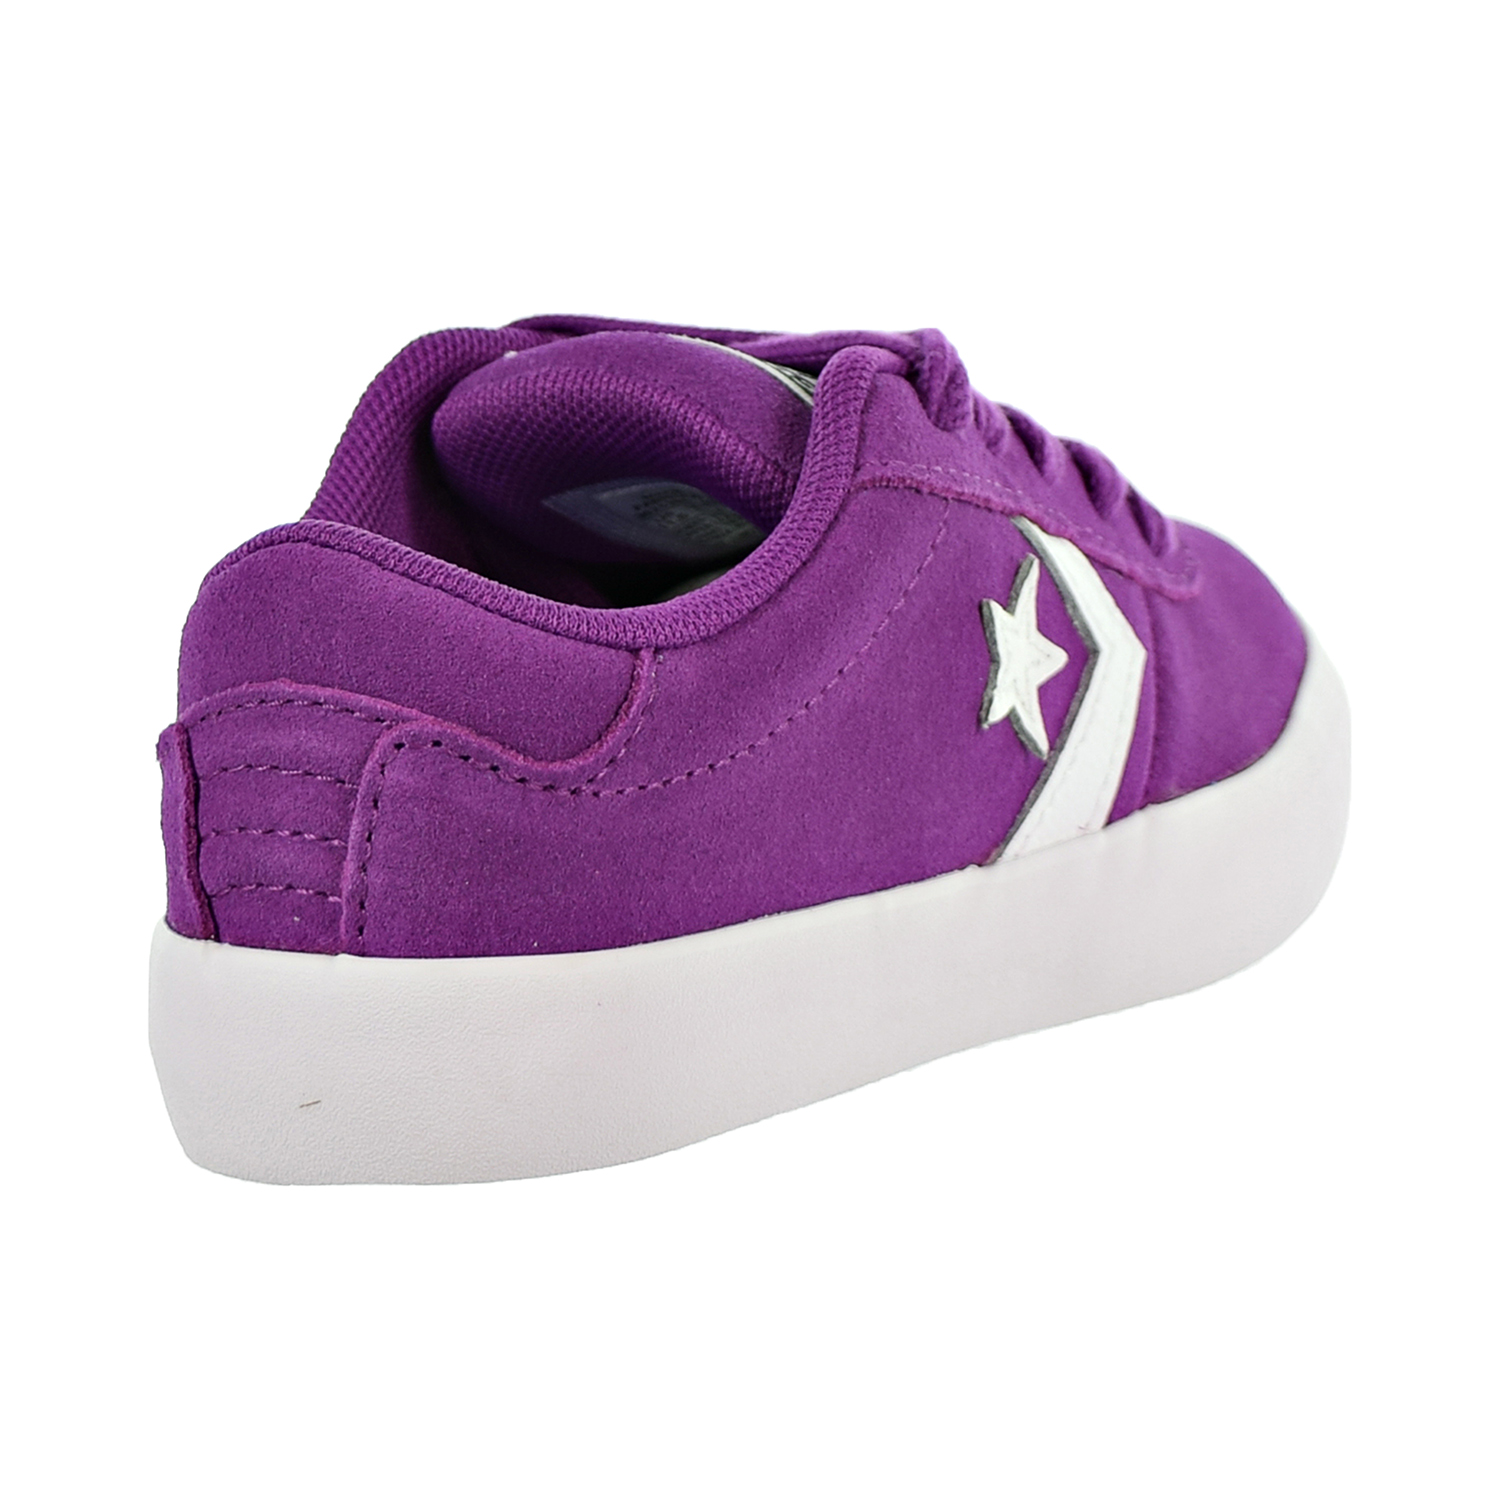 converse point star ox shoes